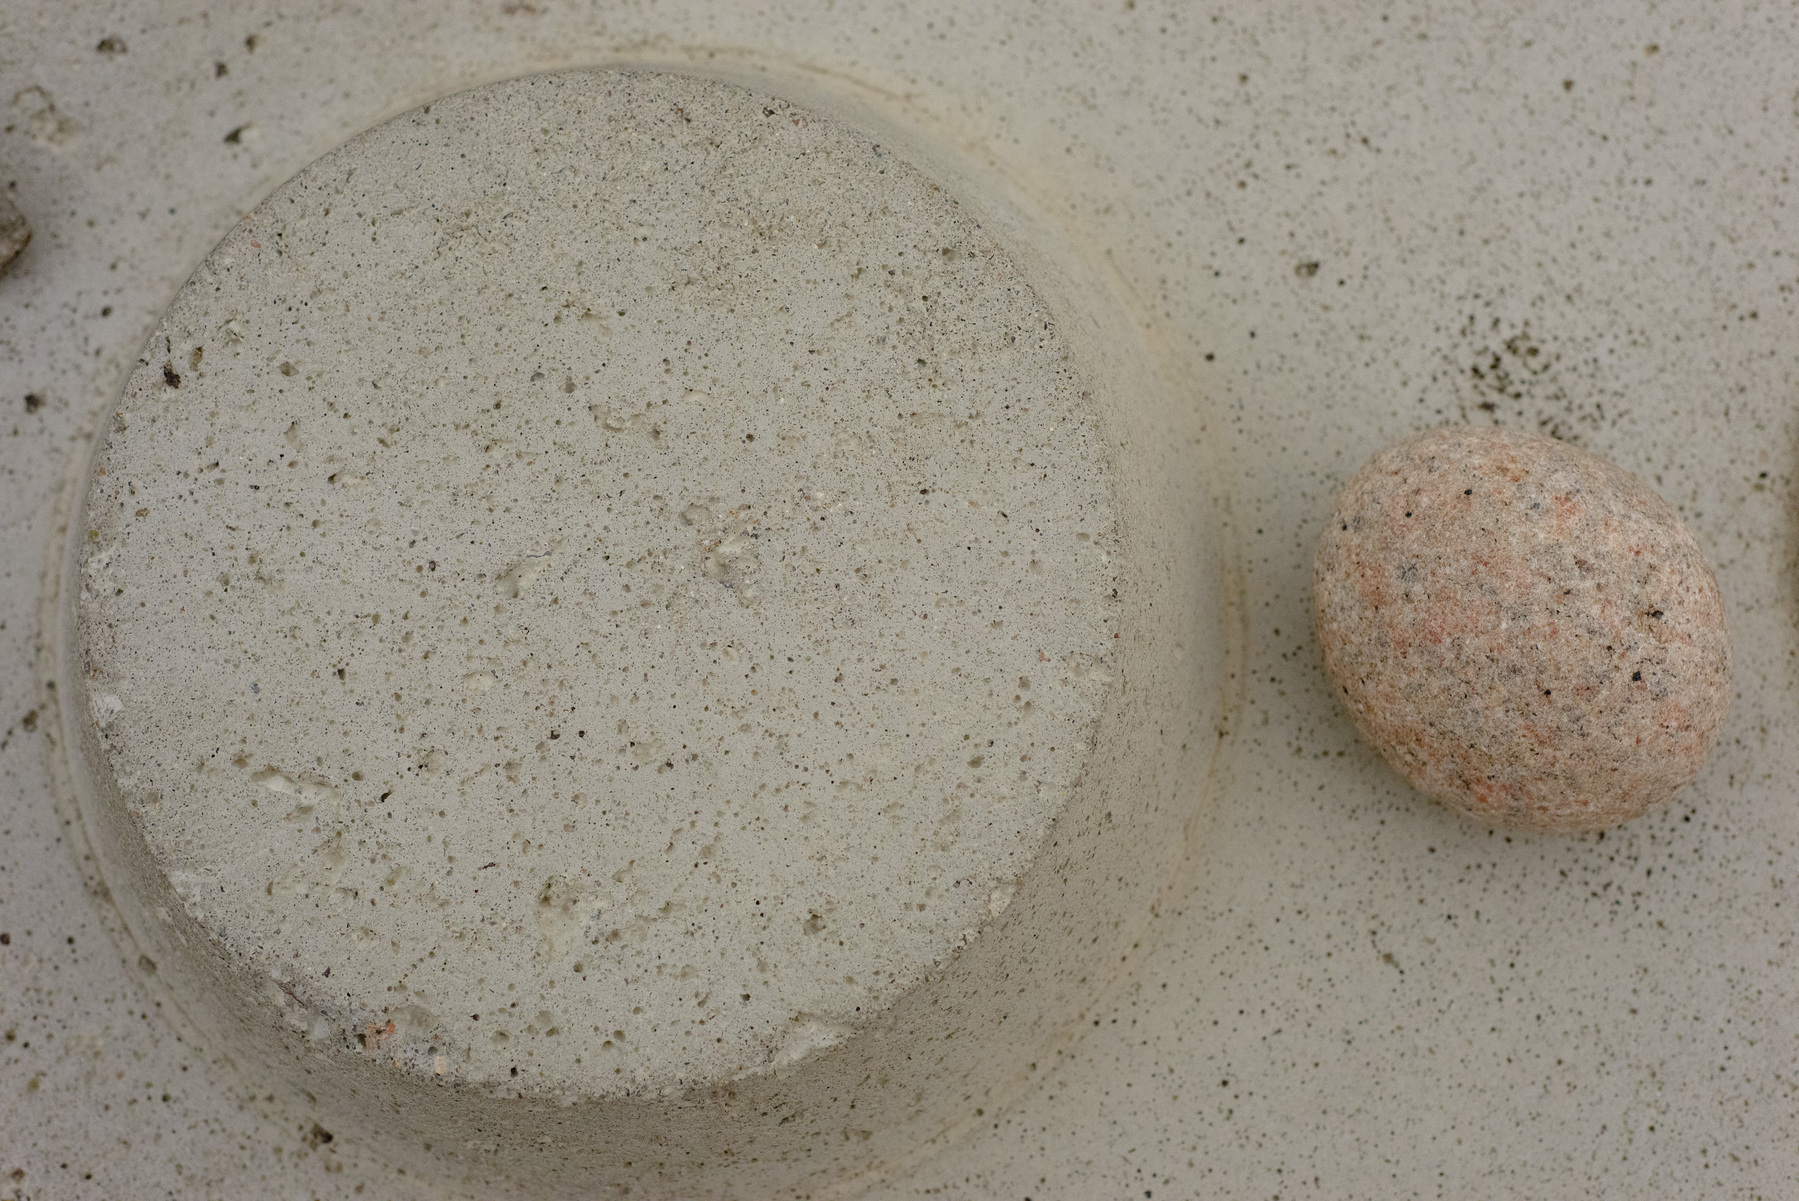 Raised concrete circle with matching color rounded rock beside.